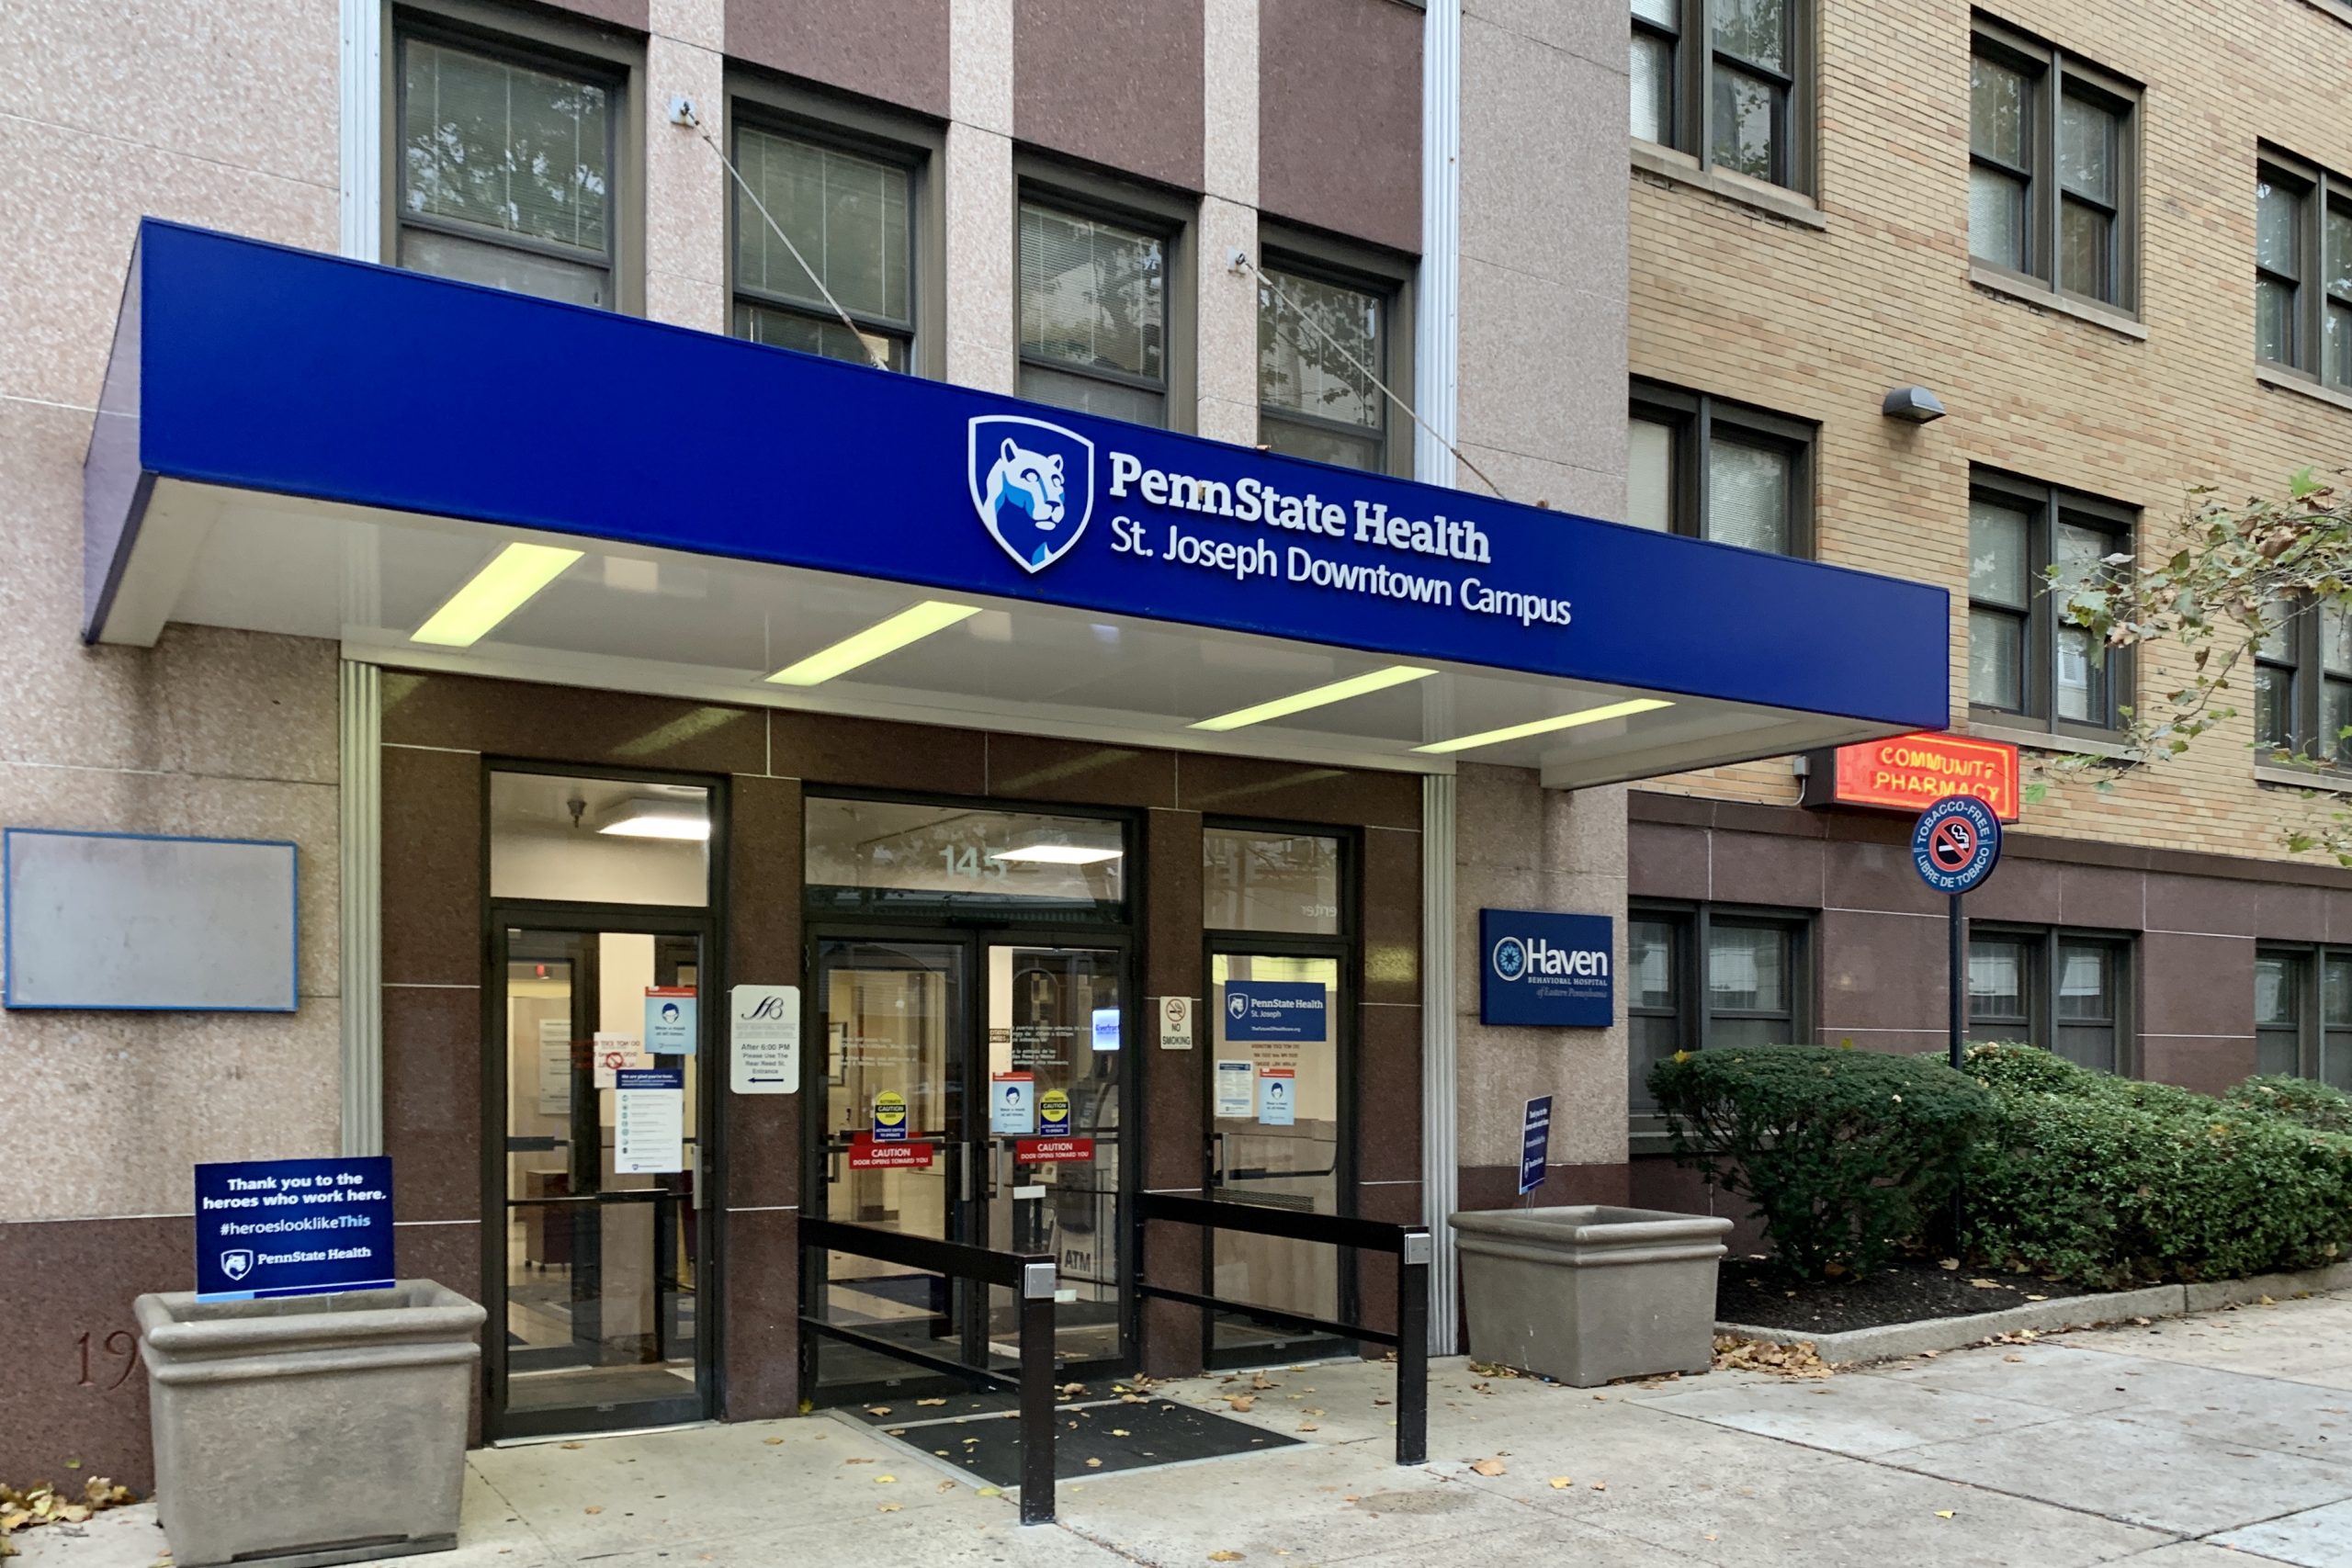 Penn State Health to sell downtown Reading properties, no change to health services at locations